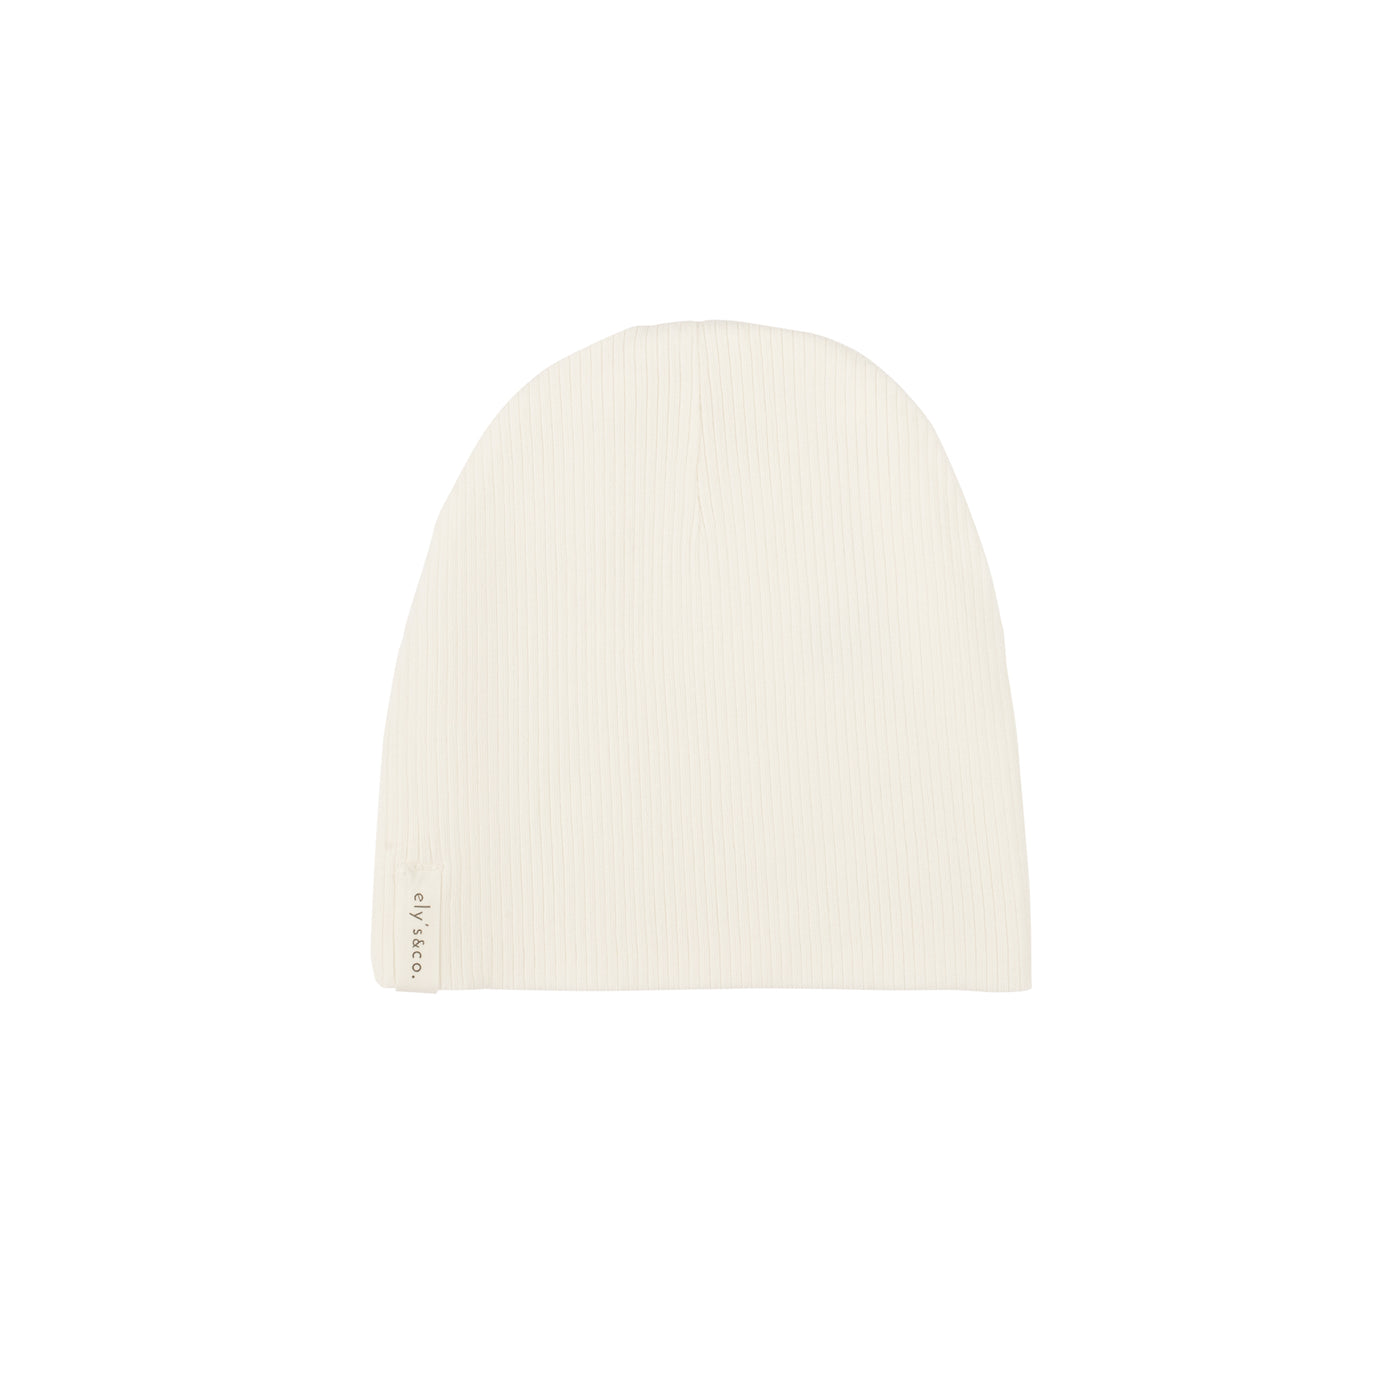 Ely's & Co. Beanie Solid Rib Ivory